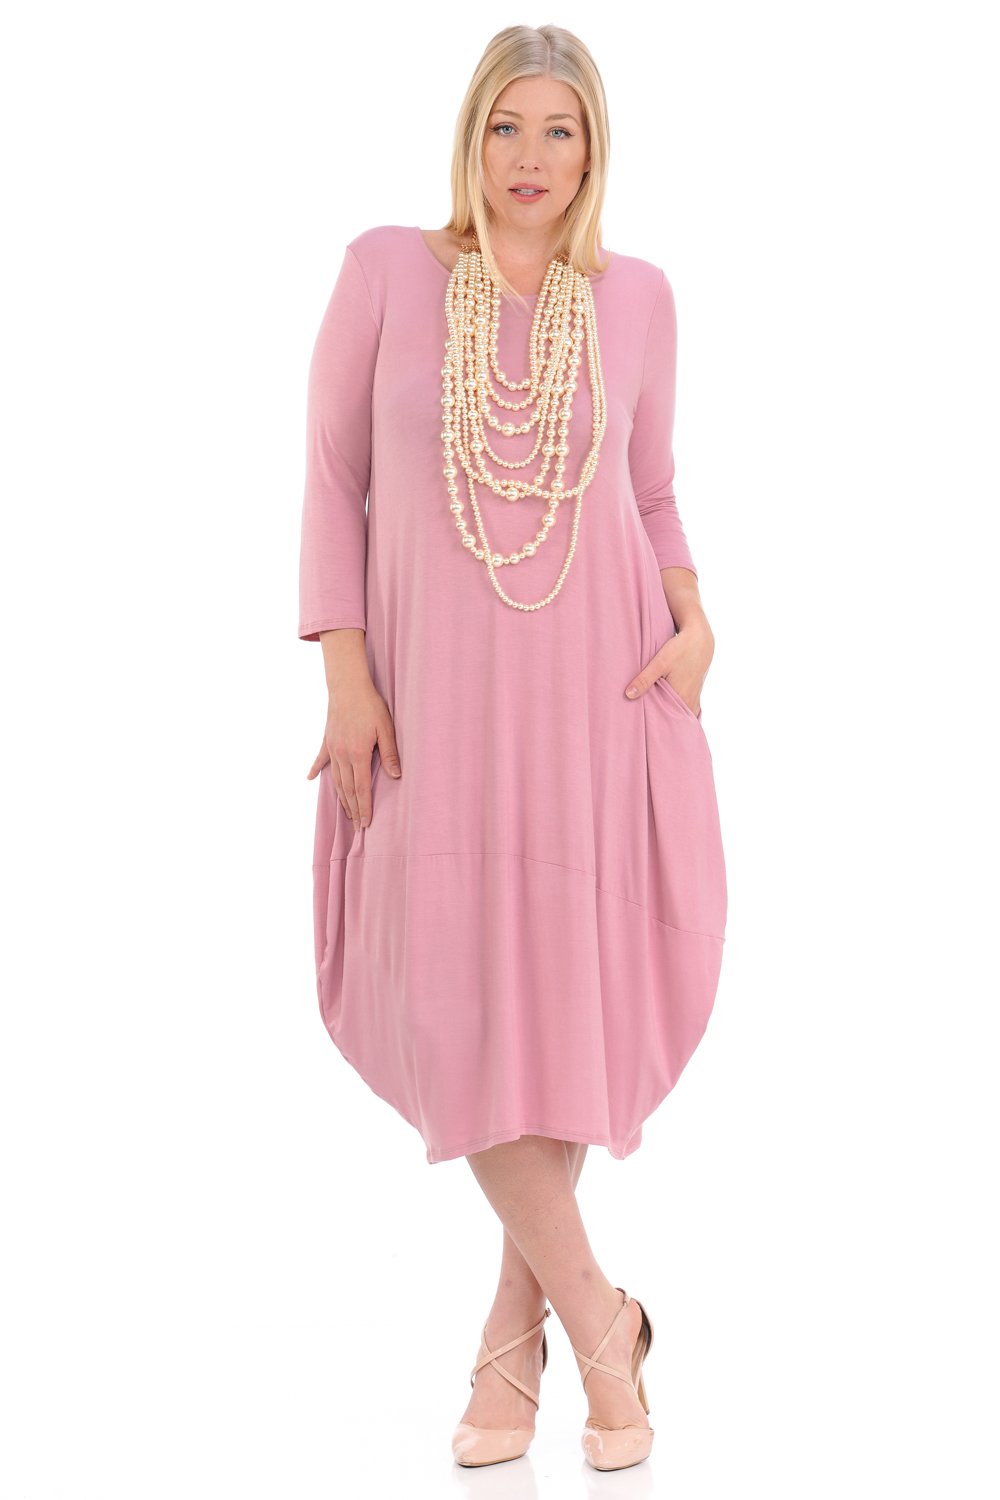 Pastel by Vivienne Women's Fashion Clothing